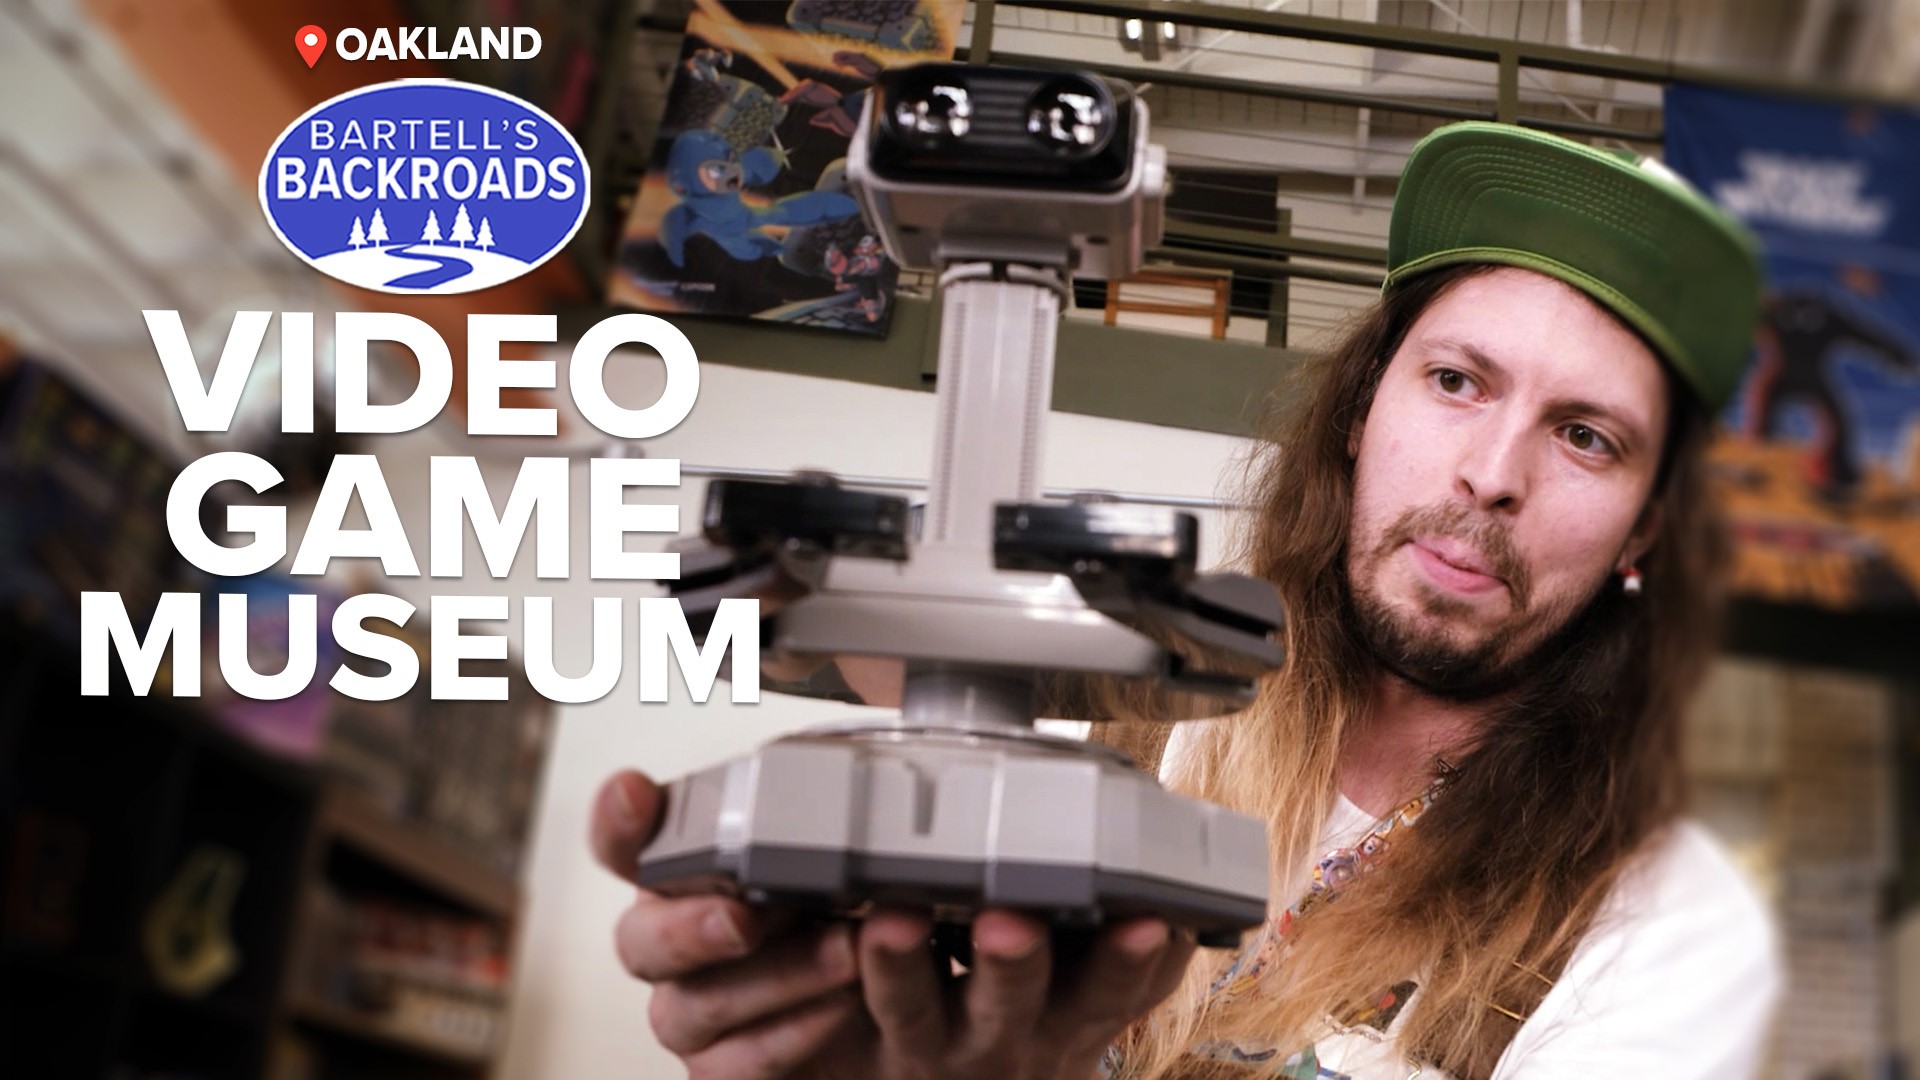 This museum archives and lets you play hard to find or once lost video games.